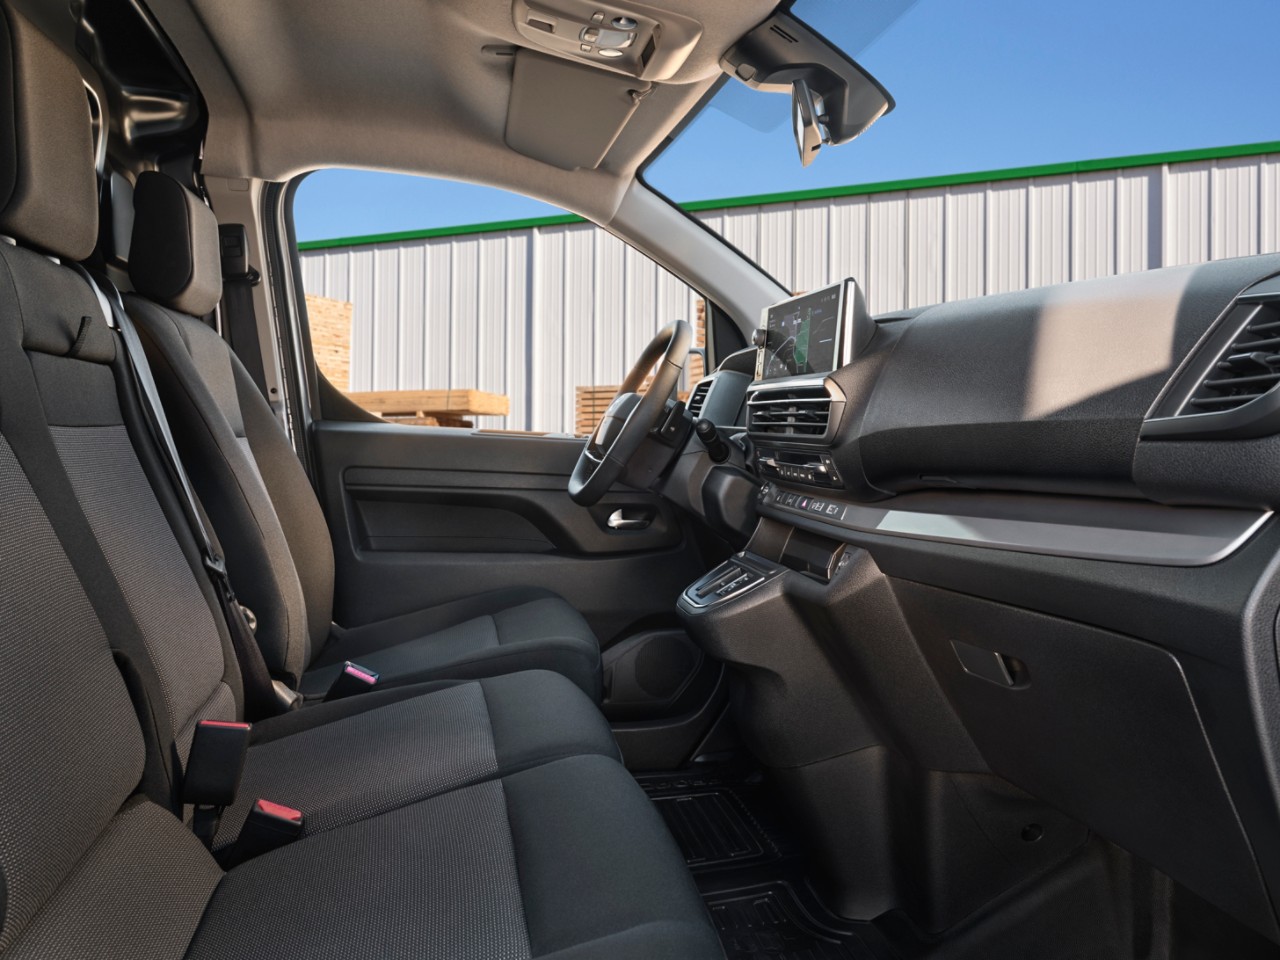 The Proace’s roomy and flexible interior 